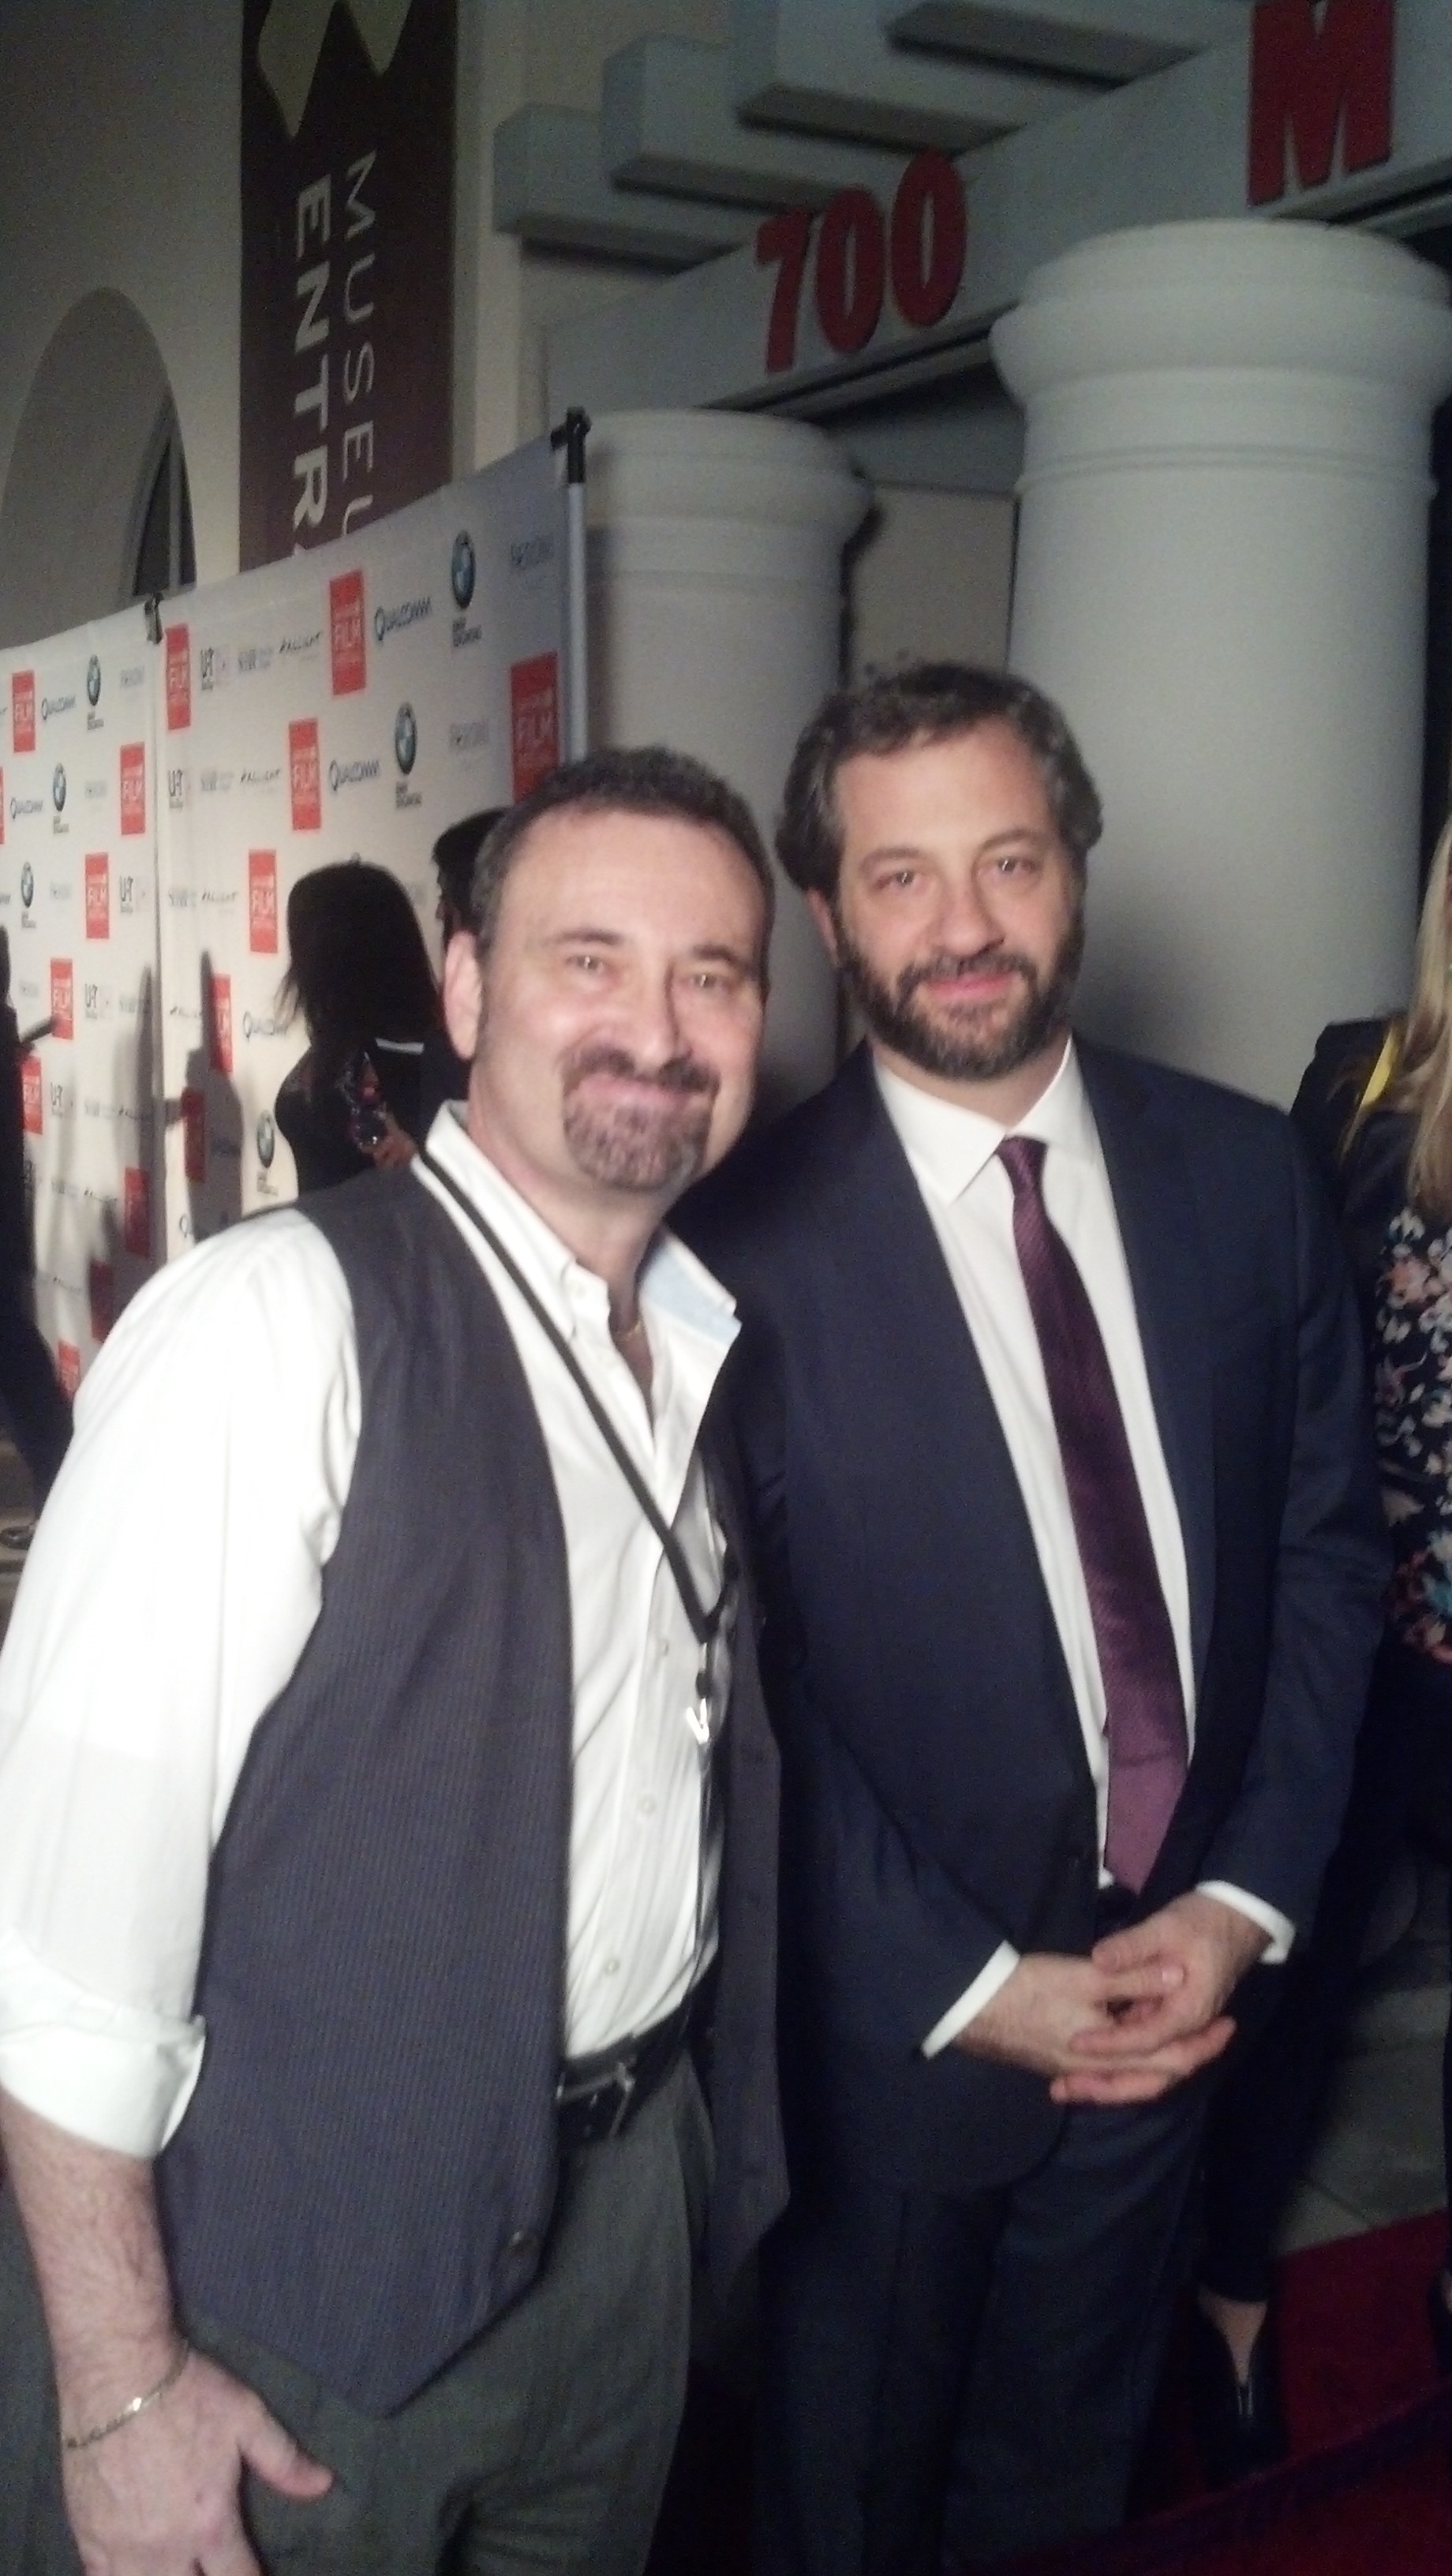 Judd Apatow and Mark Benjamin at the Judd Apatow Tribute at The San Diego Film Festival